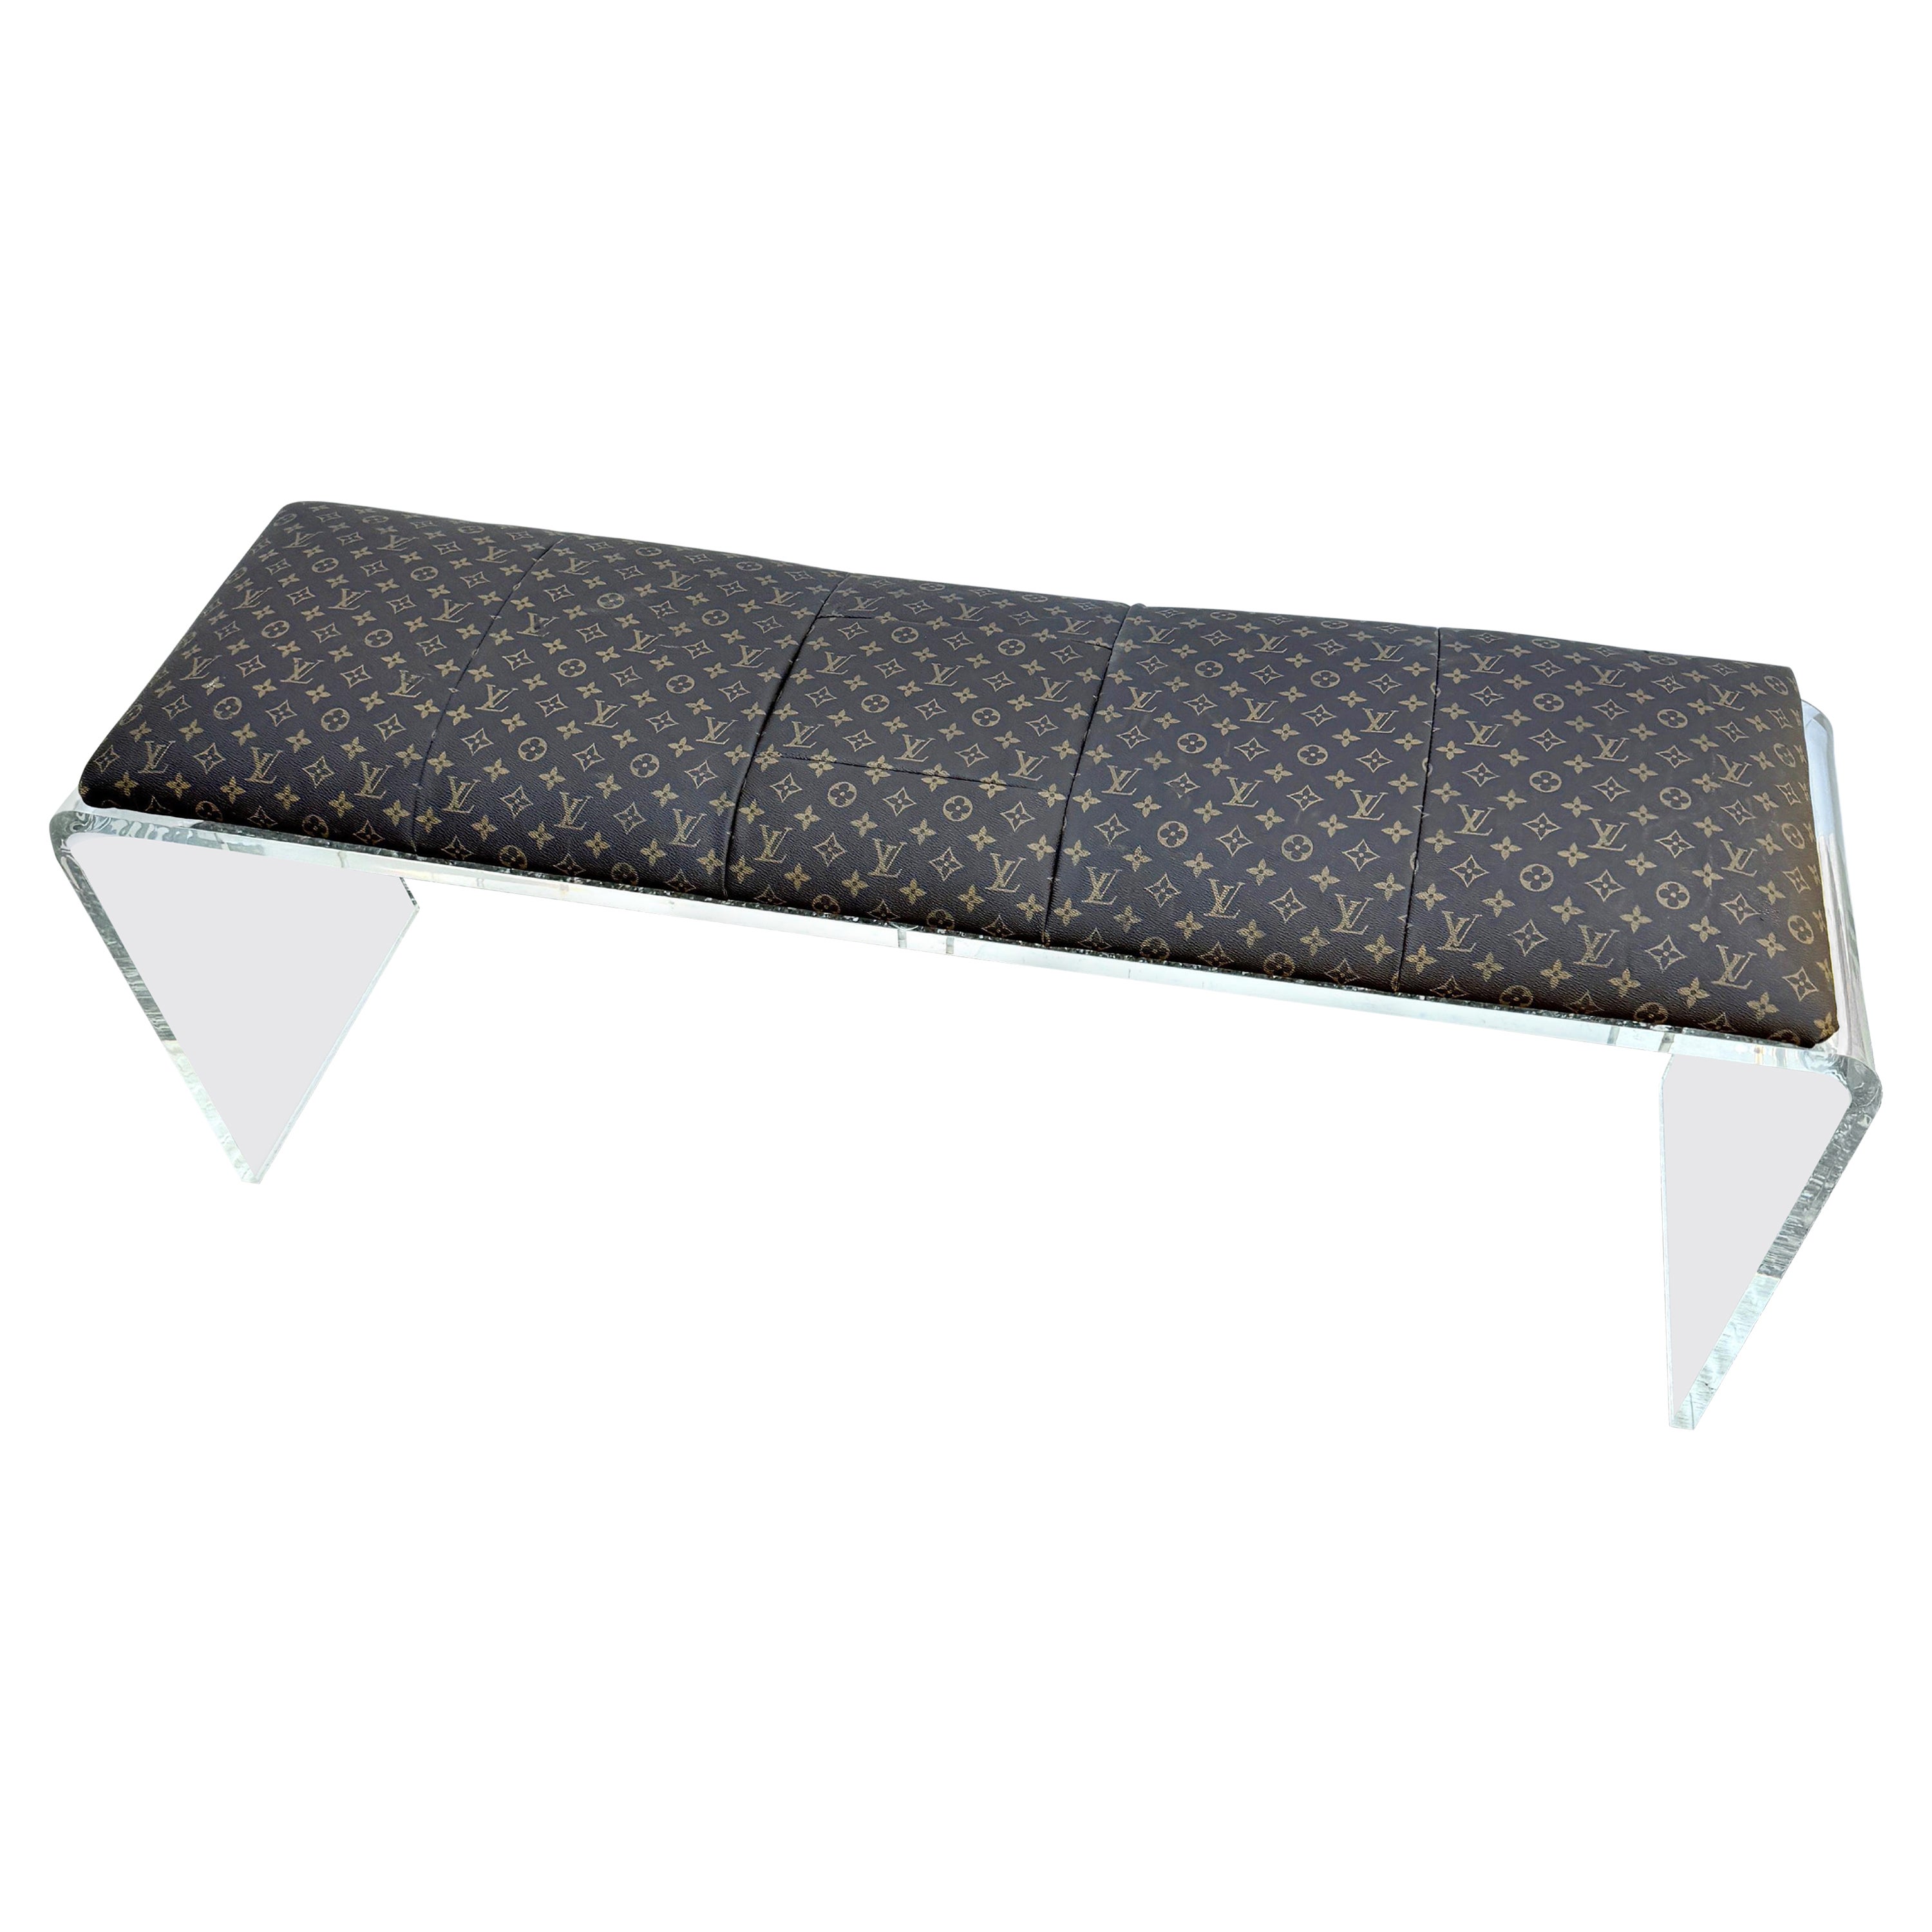 Lucite Bench Upholstered in Louis Vuitton Monogram Fabric 